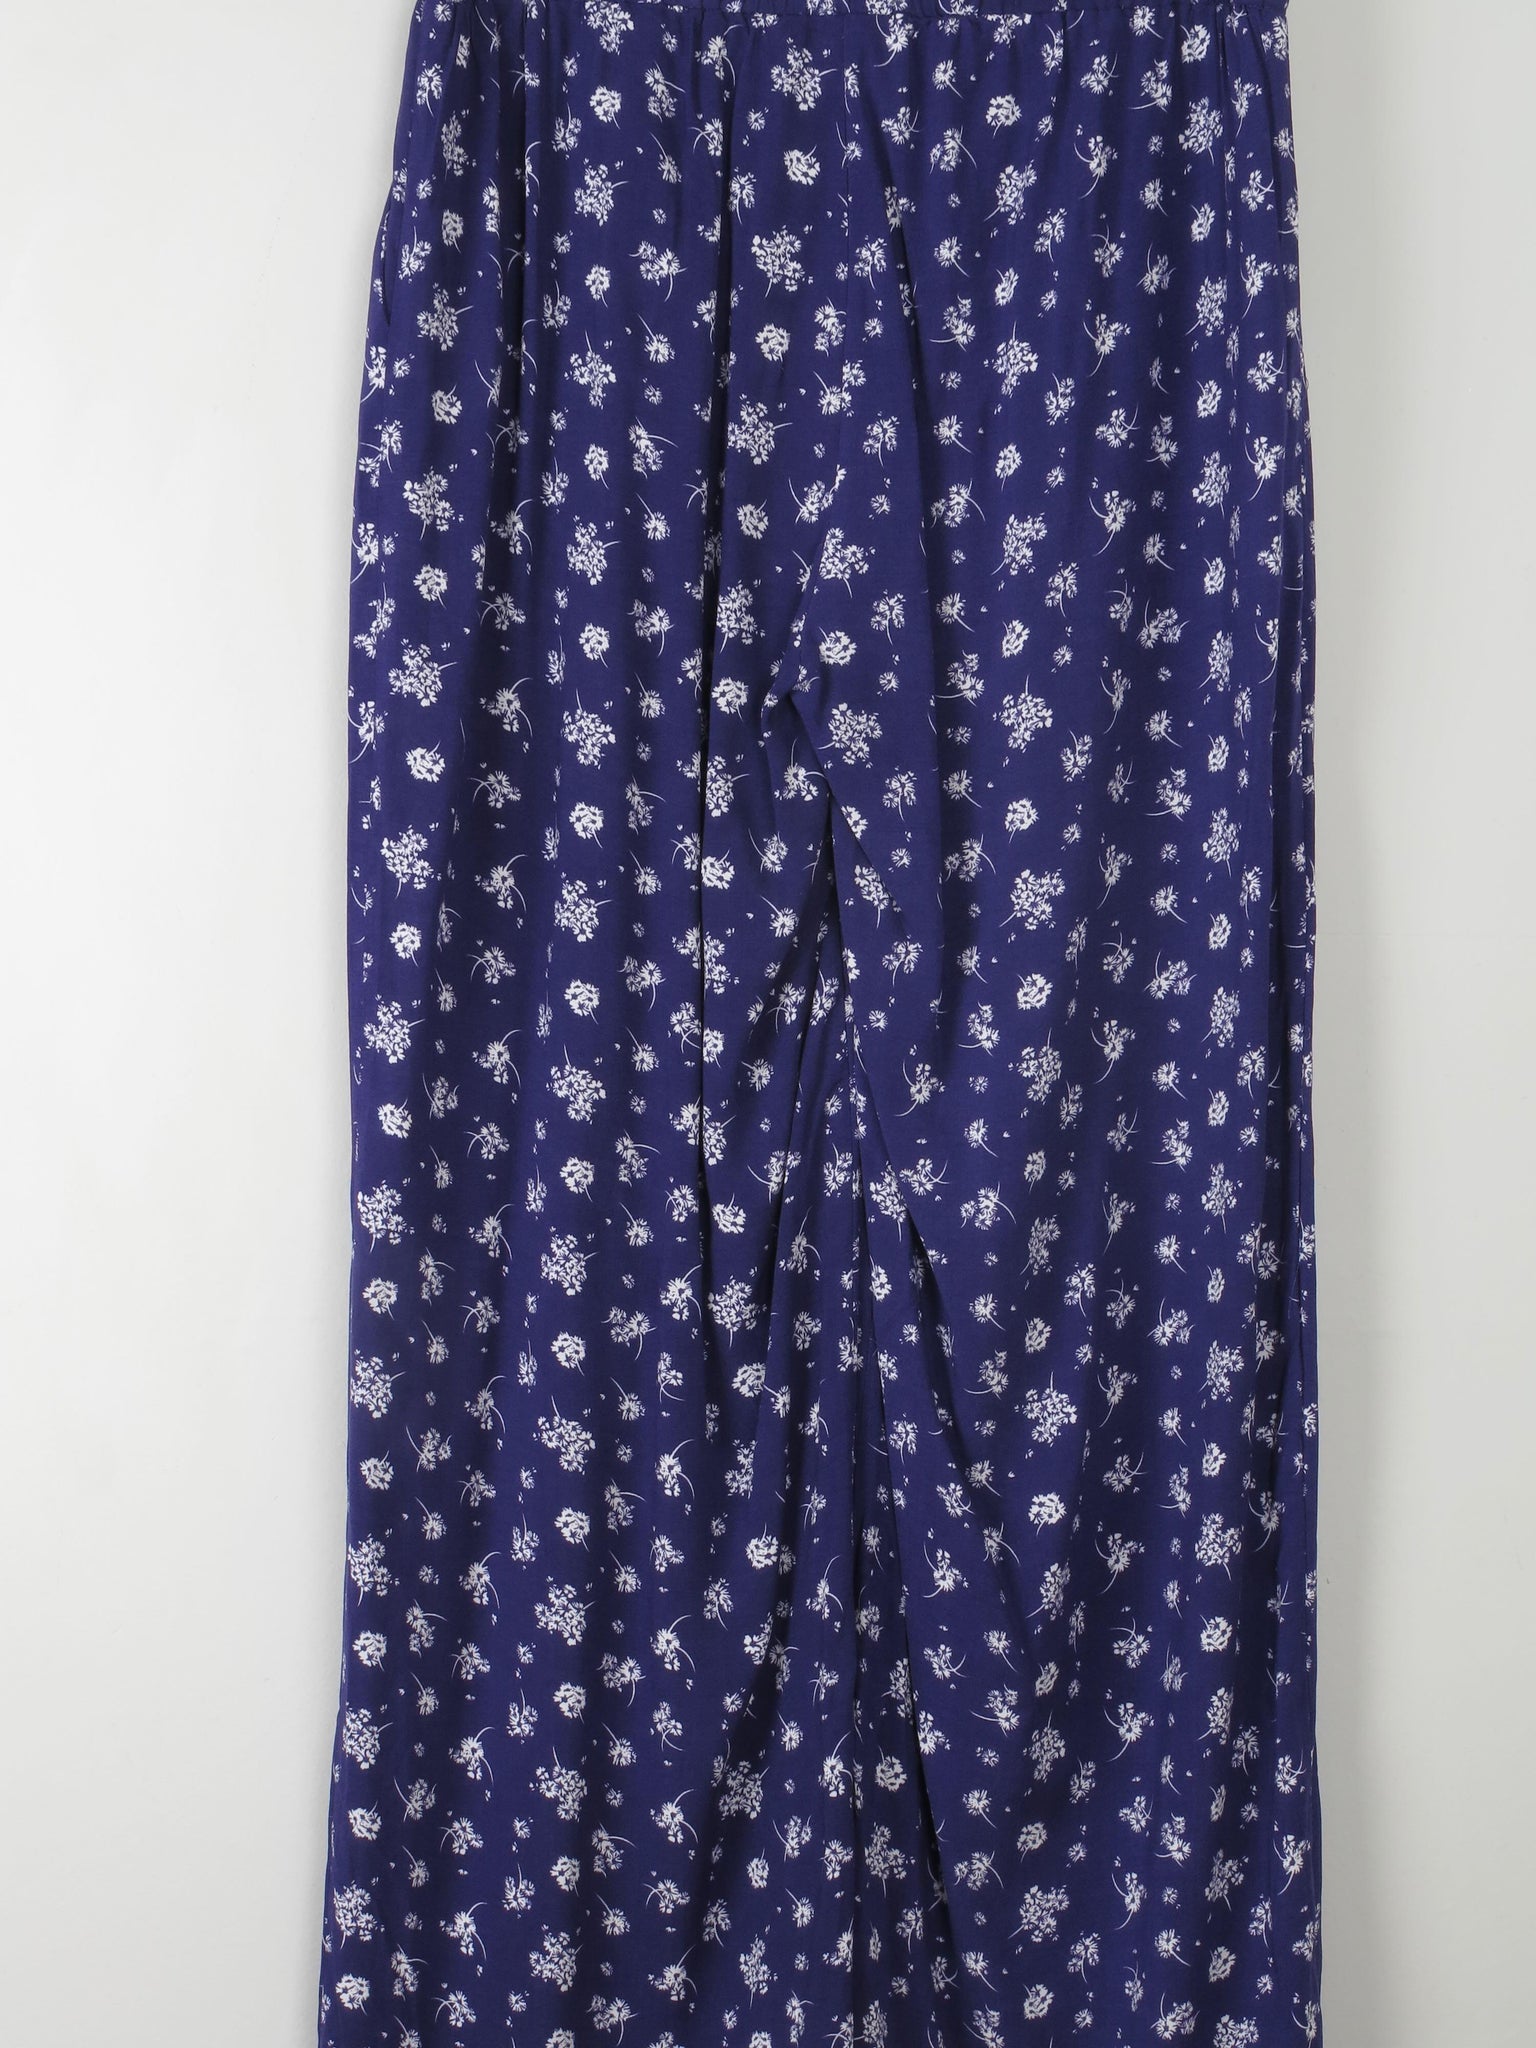 Women's Saint Tropez Navy Trousers Floral Printed New L - The Harlequin